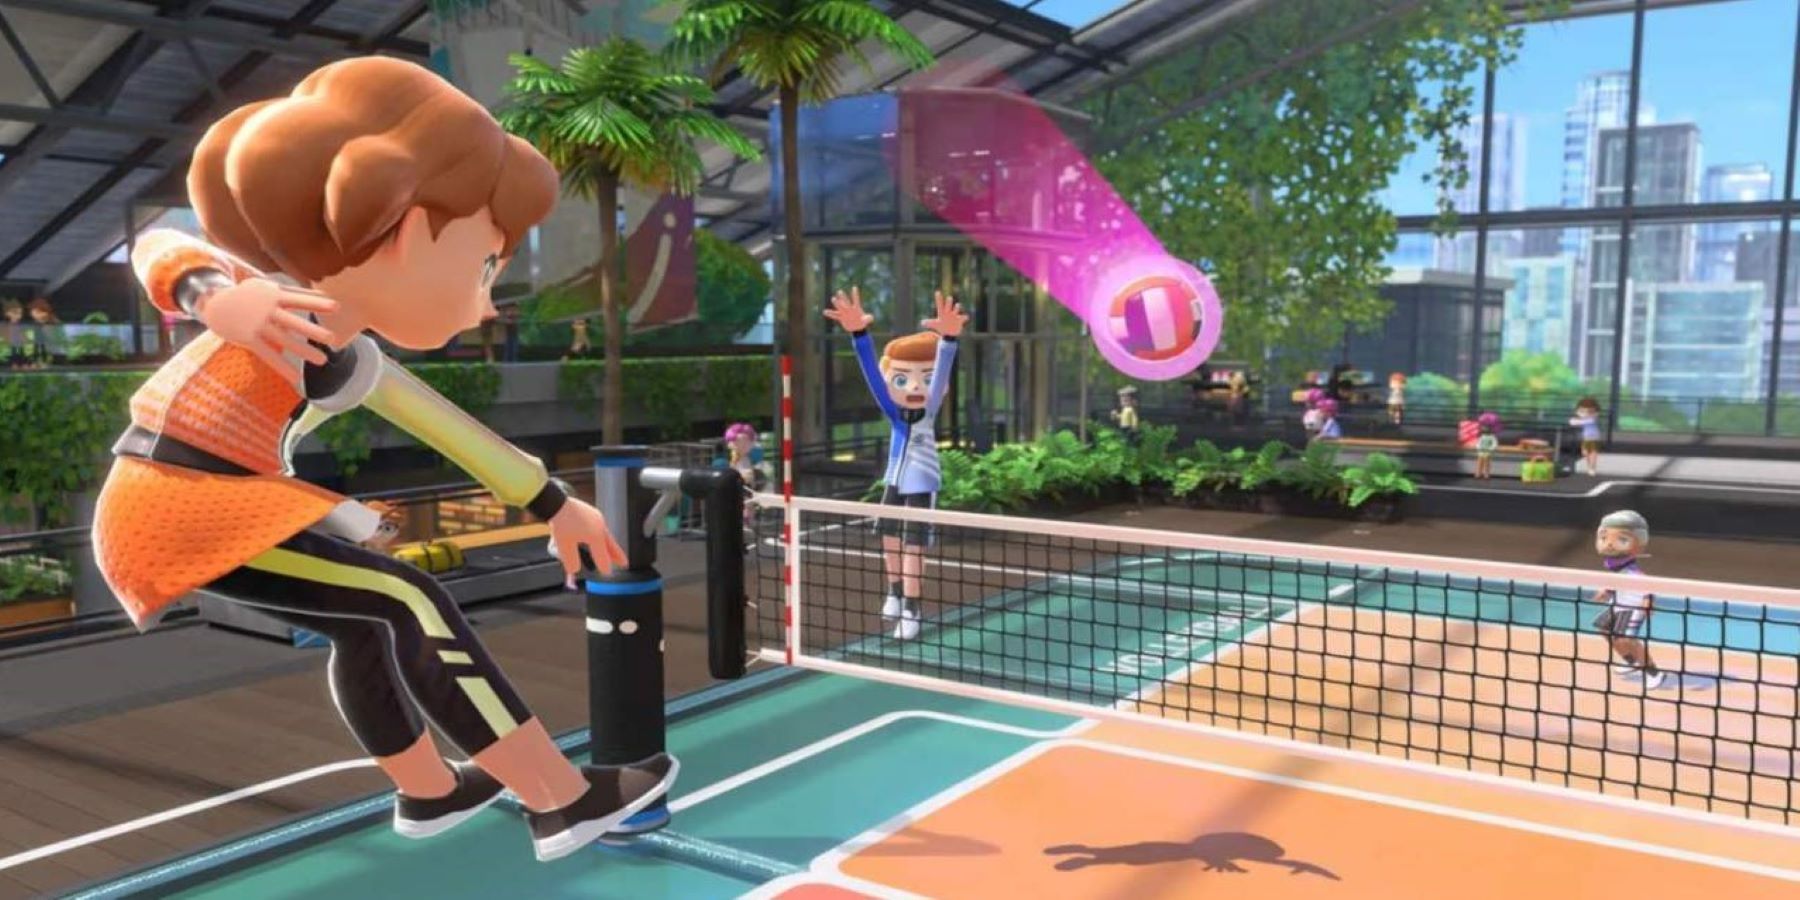 A player spiking a volleyball in Nintendo Switch Sports